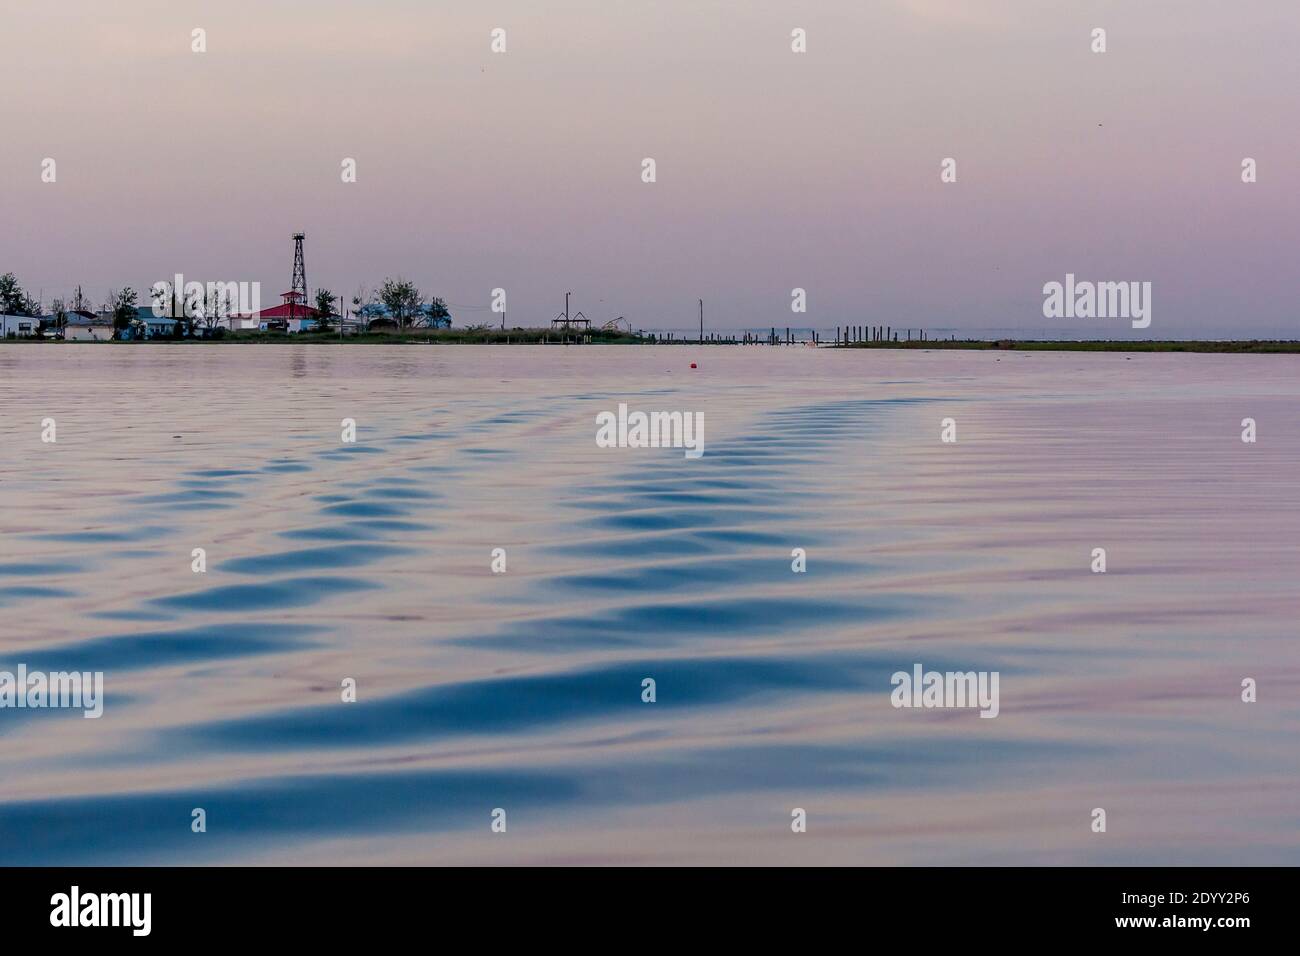 Pattern caused by boat wake in Mispillion Harbour, Delaware Bay, US Stock Photo